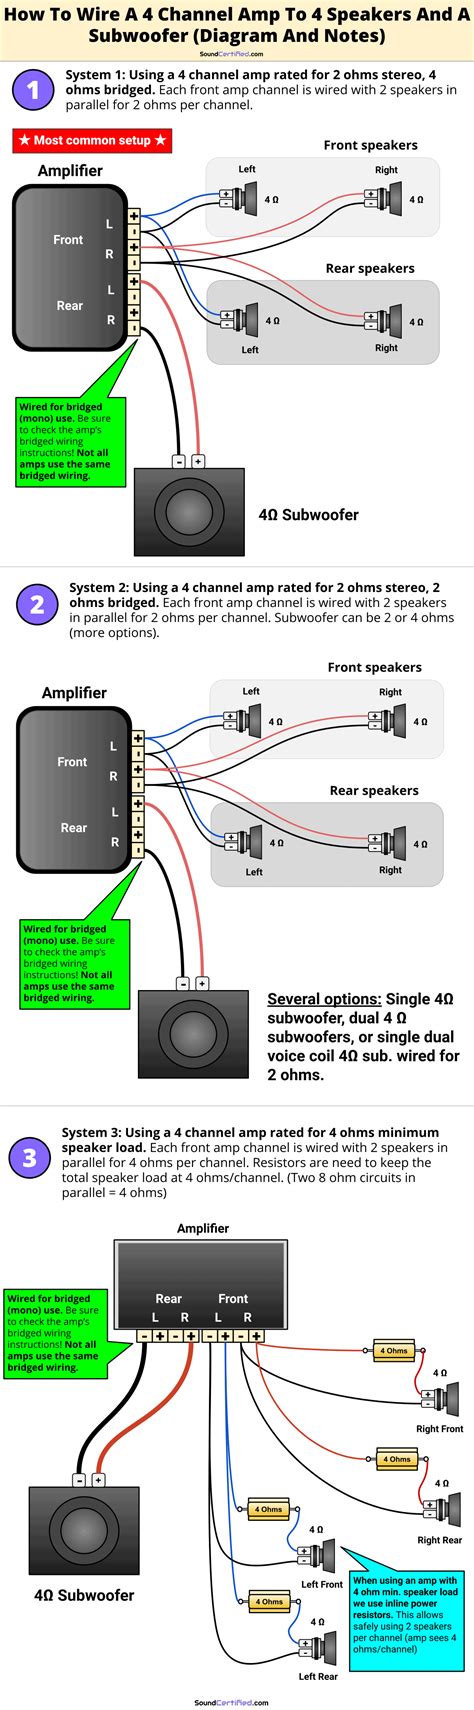 8 speakers 4 channel amp wiring diagram. At a minimum, get a 4 chnl amp. Power the sub on two chnls and the tower pair on the other two. This will give your all 4 chnls of the existing amp to run the 8 @ 2 Ohm x 4 chnls. Right now, im guessing you have 4 in-boats sharing the amps 4 ohm per/chnl power. I was just thinking the same thing. 